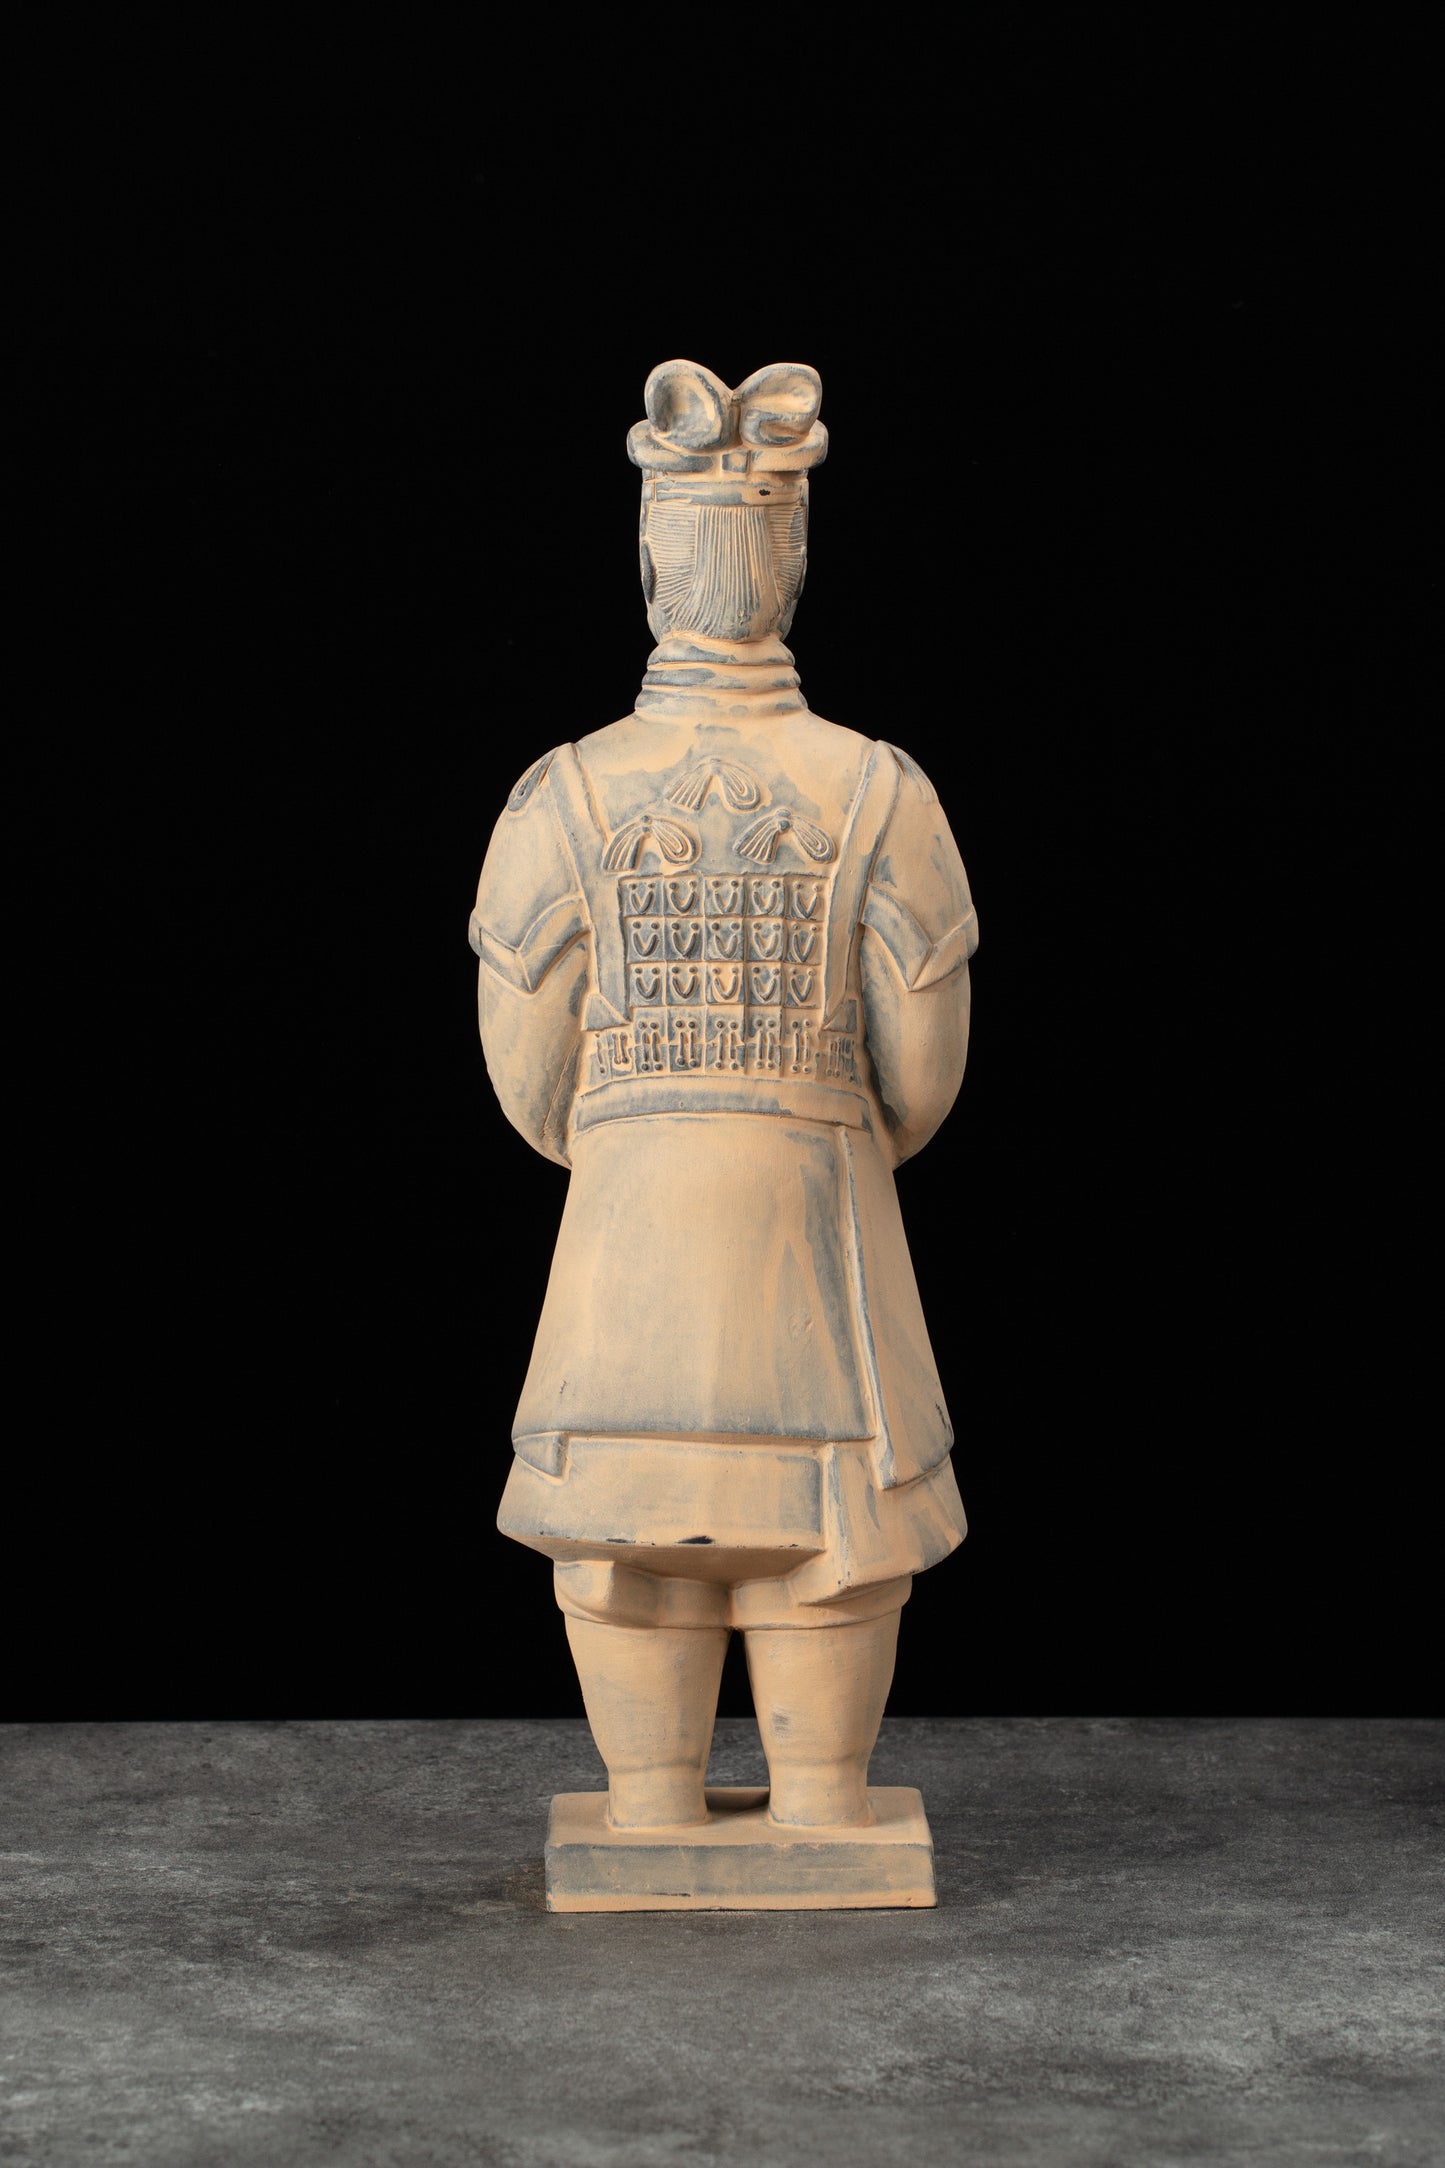 35CM General - CLAYARMY-Dynamic Military Motion: Experience the dynamic military motion of the 35CM Terracotta Army General, embodying the essence of a leader in strategic movement.